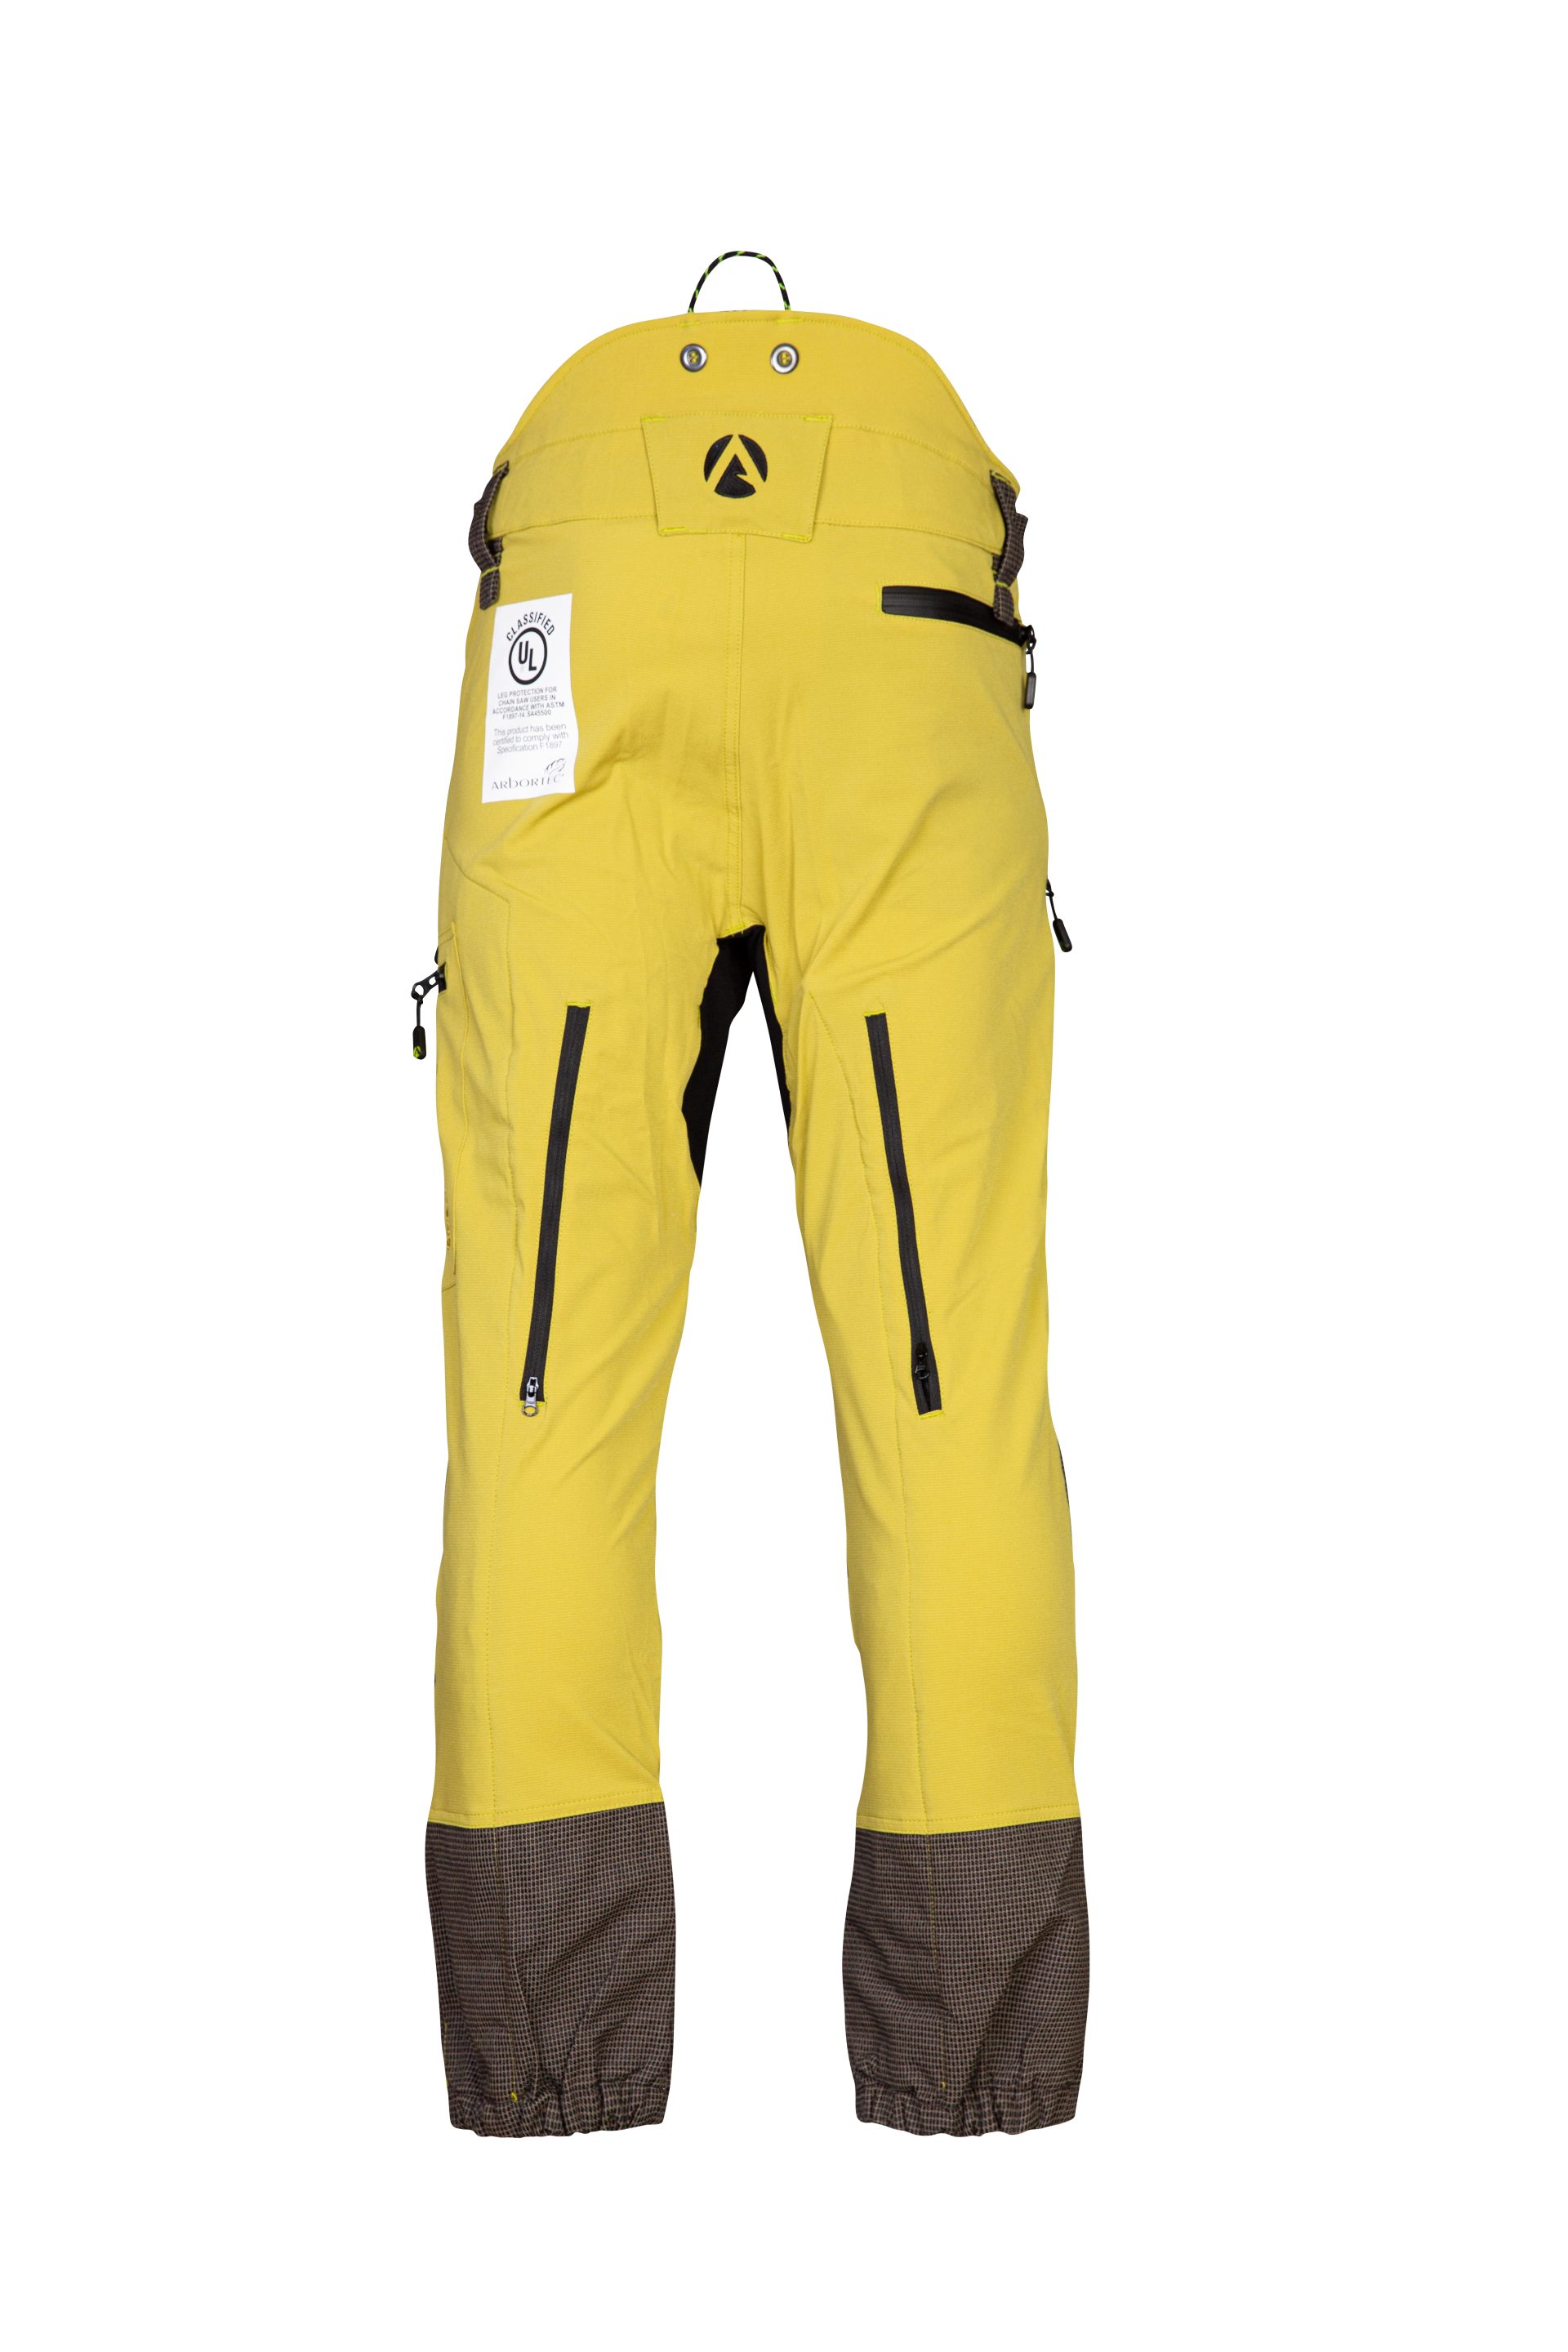 AT4060(US) Breatheflex Pro Chainsaw trousers UL Rated - Citrine